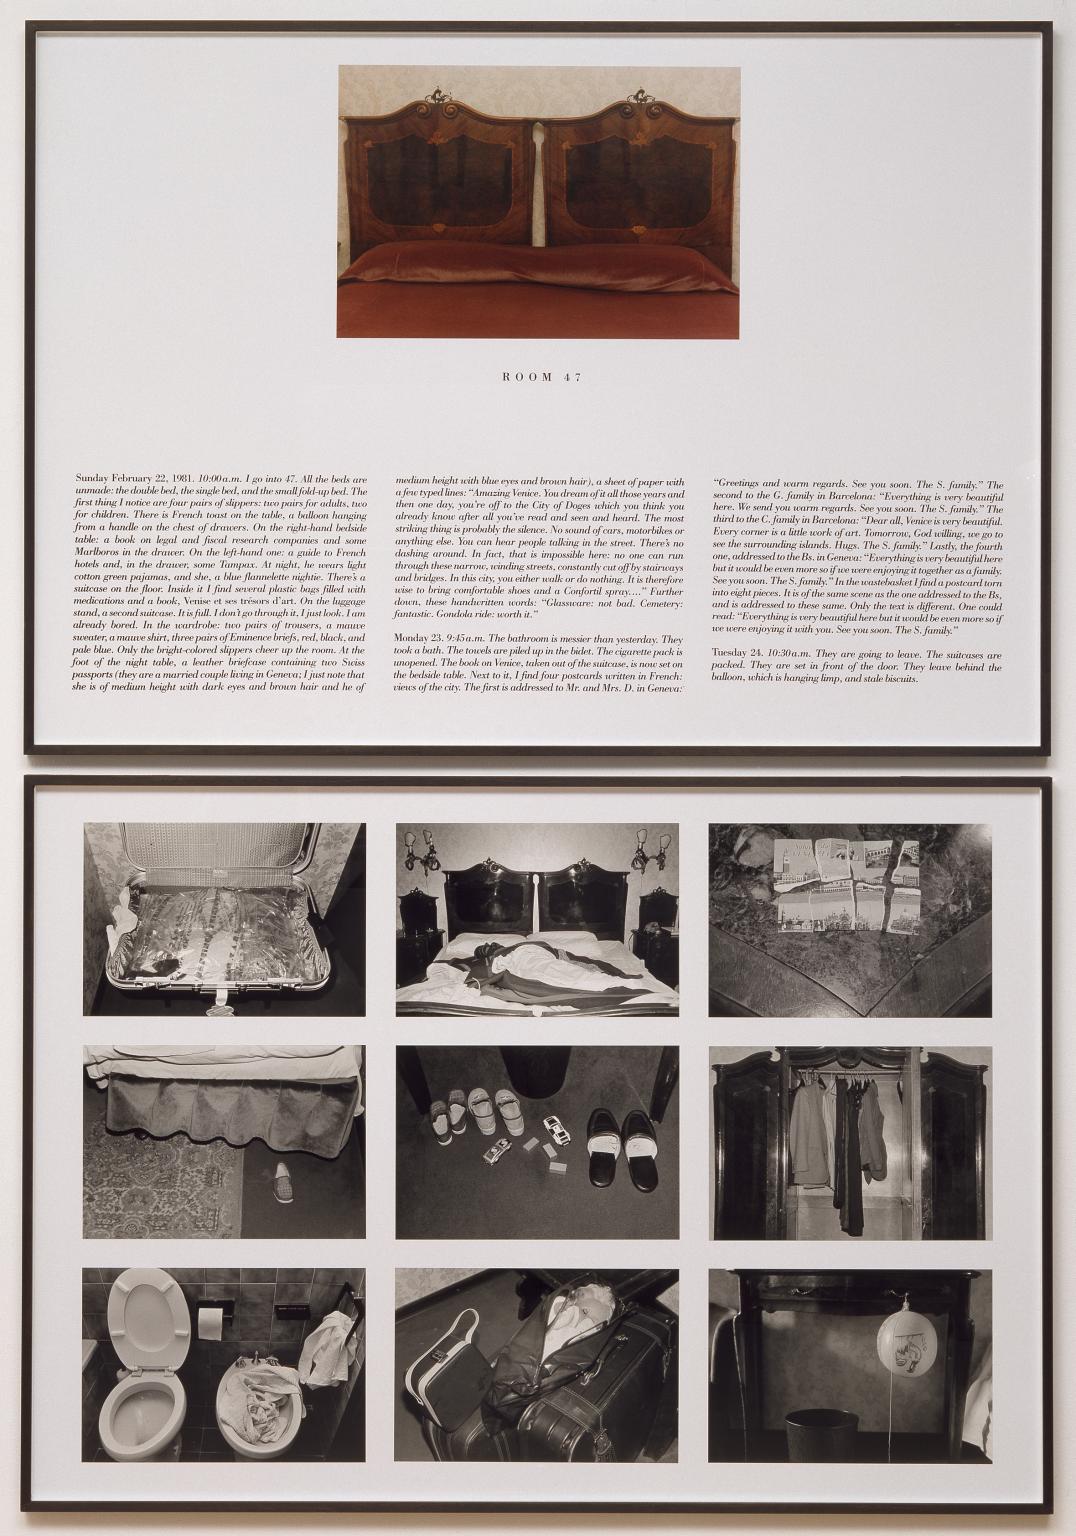 The Hotel, Room 47, Sophie Calle, 1981 Tate